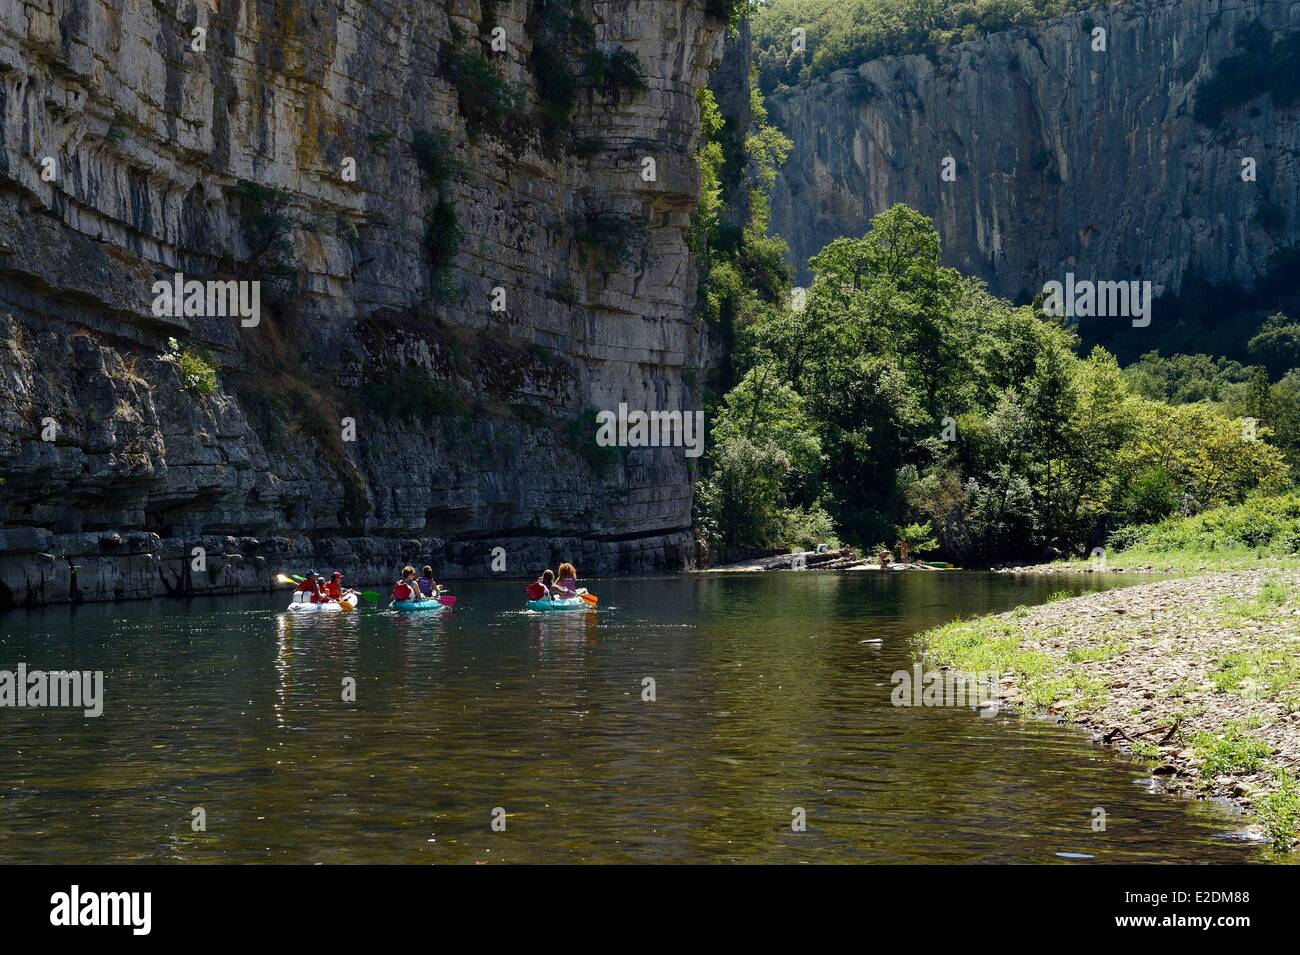 France Ardeche Les Vans Chassezac High Resolution Stock Photography and  Images - Alamy